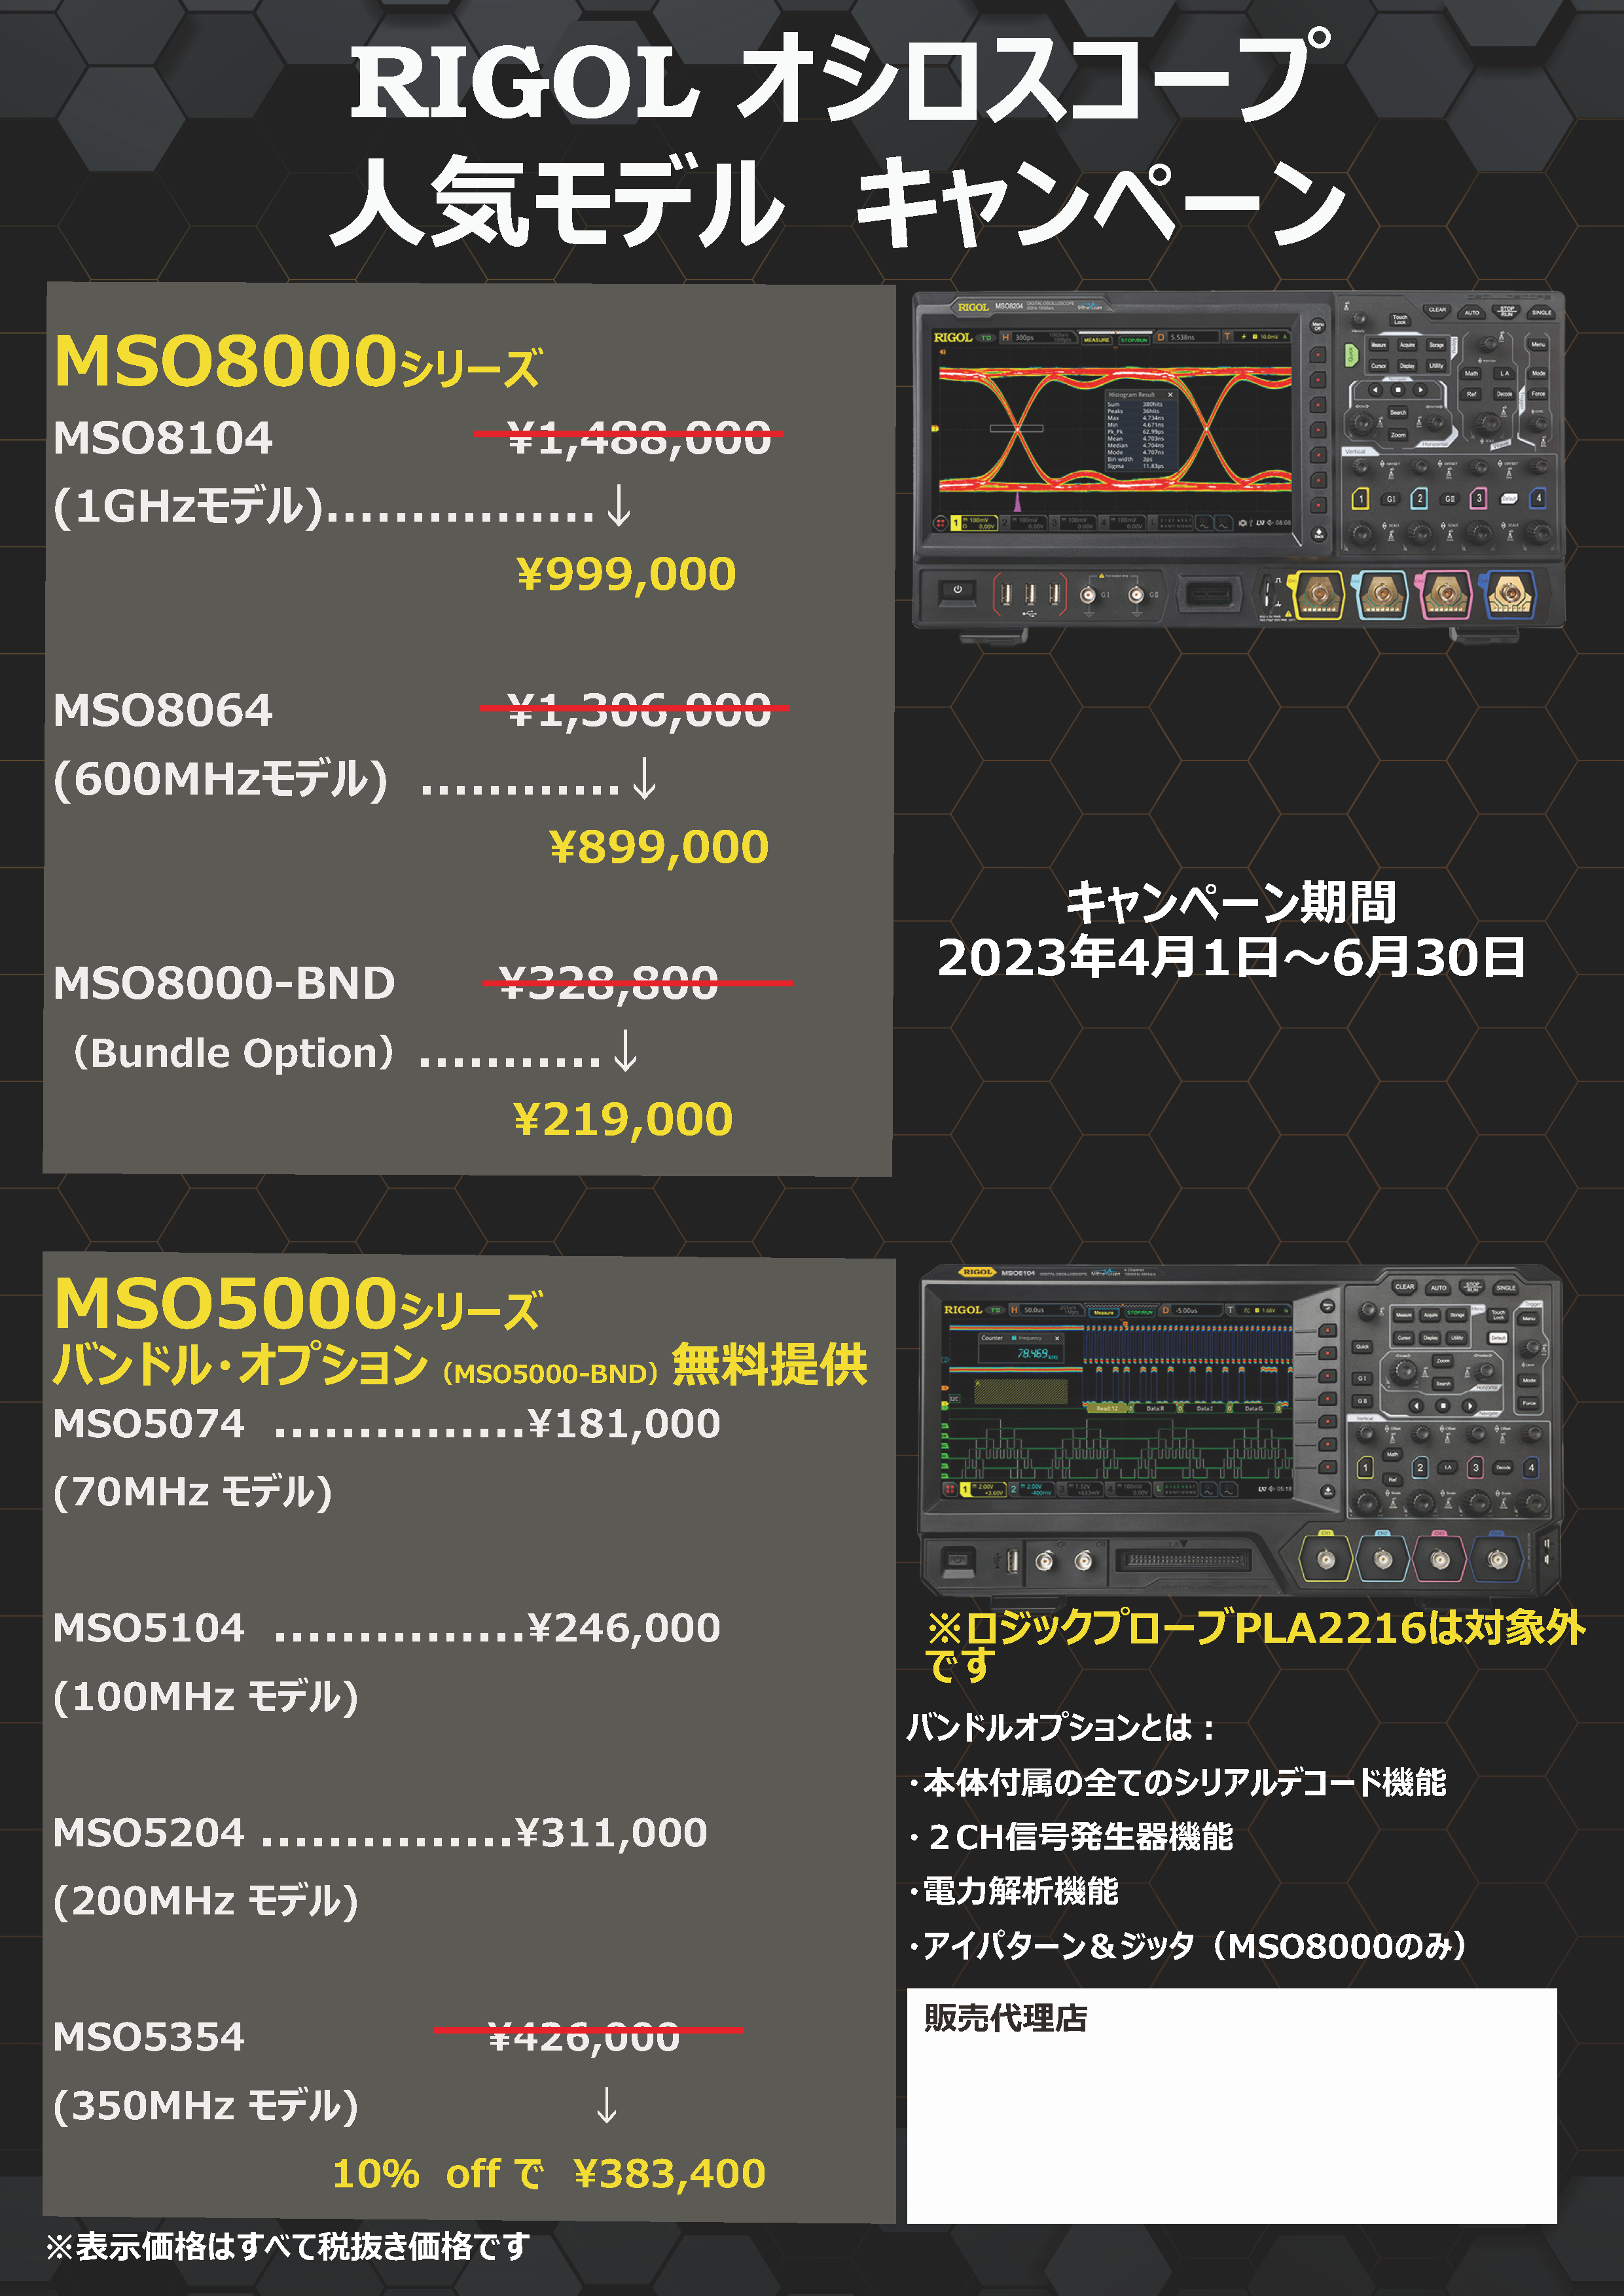 Q2 promotion frontpage_Final_复制.png